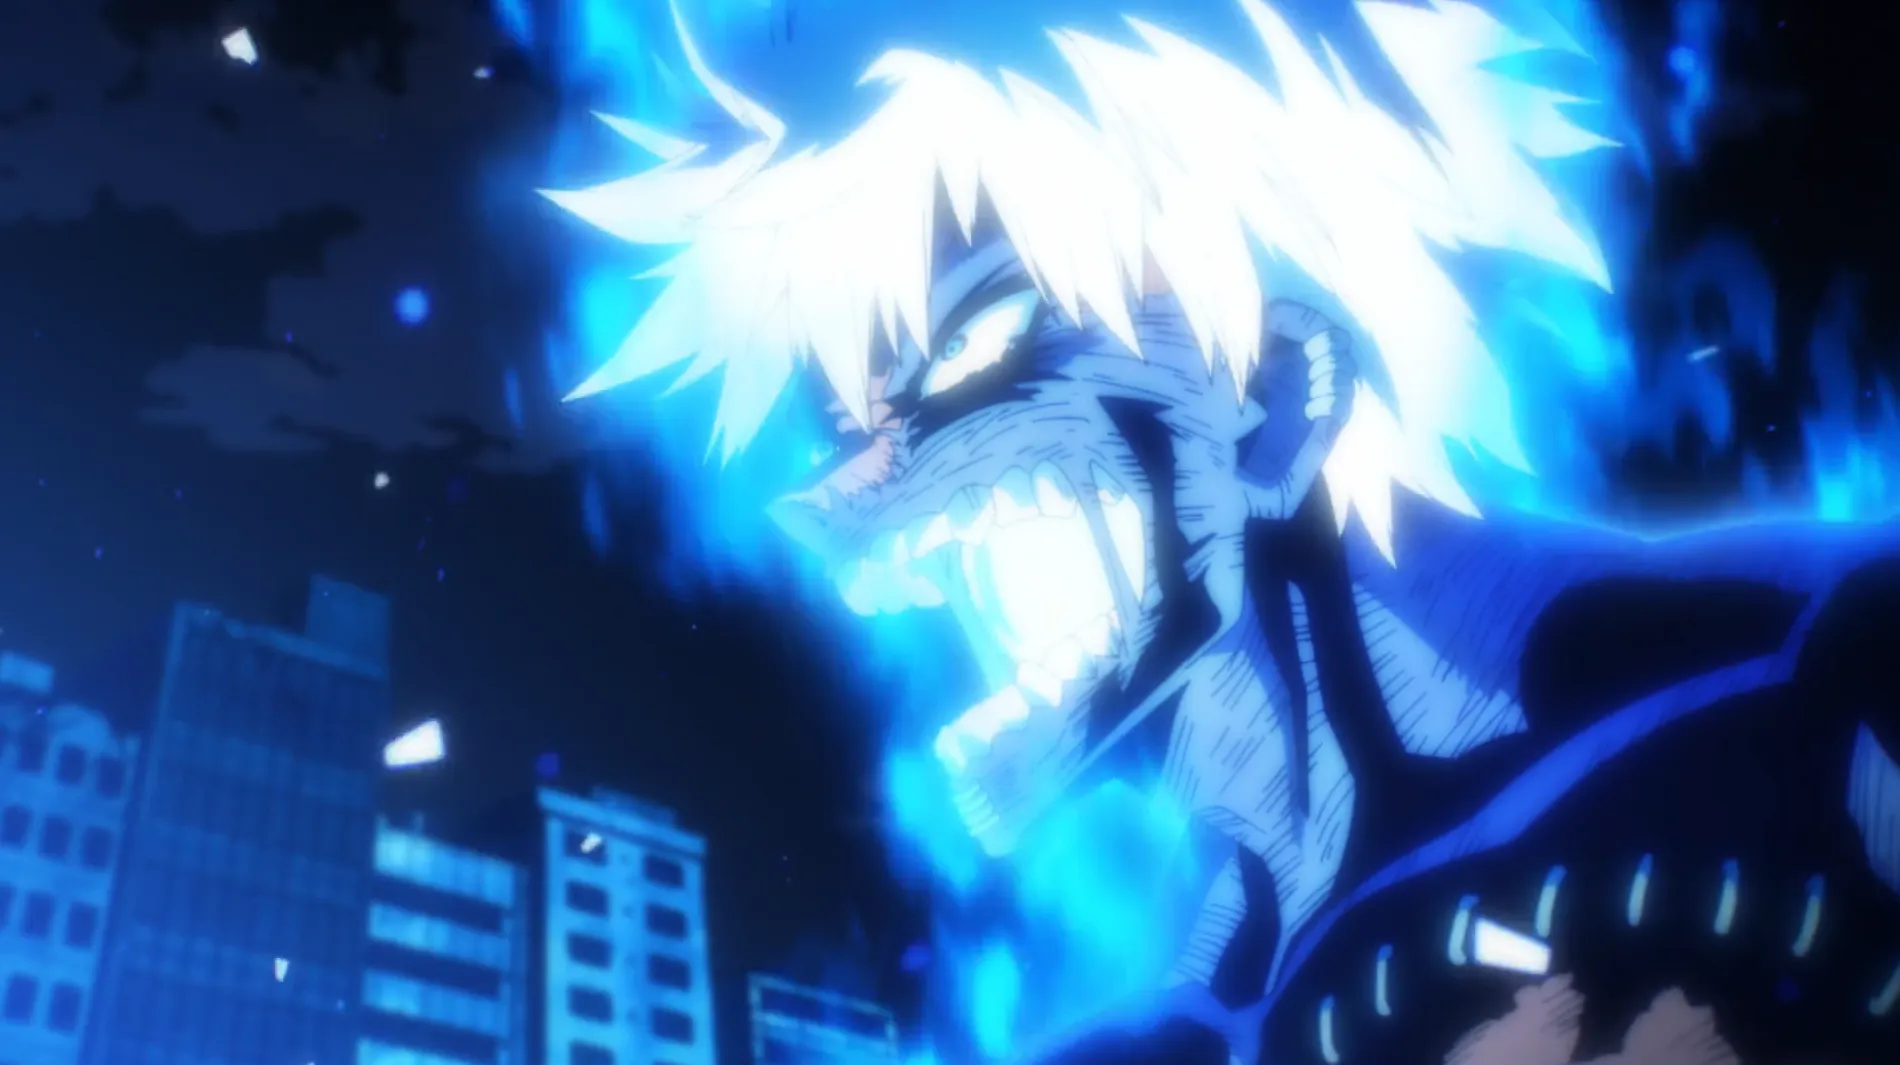 My Hero Academia Season 7 Episode 9: Release Date, Where to Watch, & More Young Dabi Toya EndeavorMy Hero Academia Season 7 Episode 9: Release Date, Where to Watch, & More Young Dabi Toya Endeavor Todoroki Dabi Fight